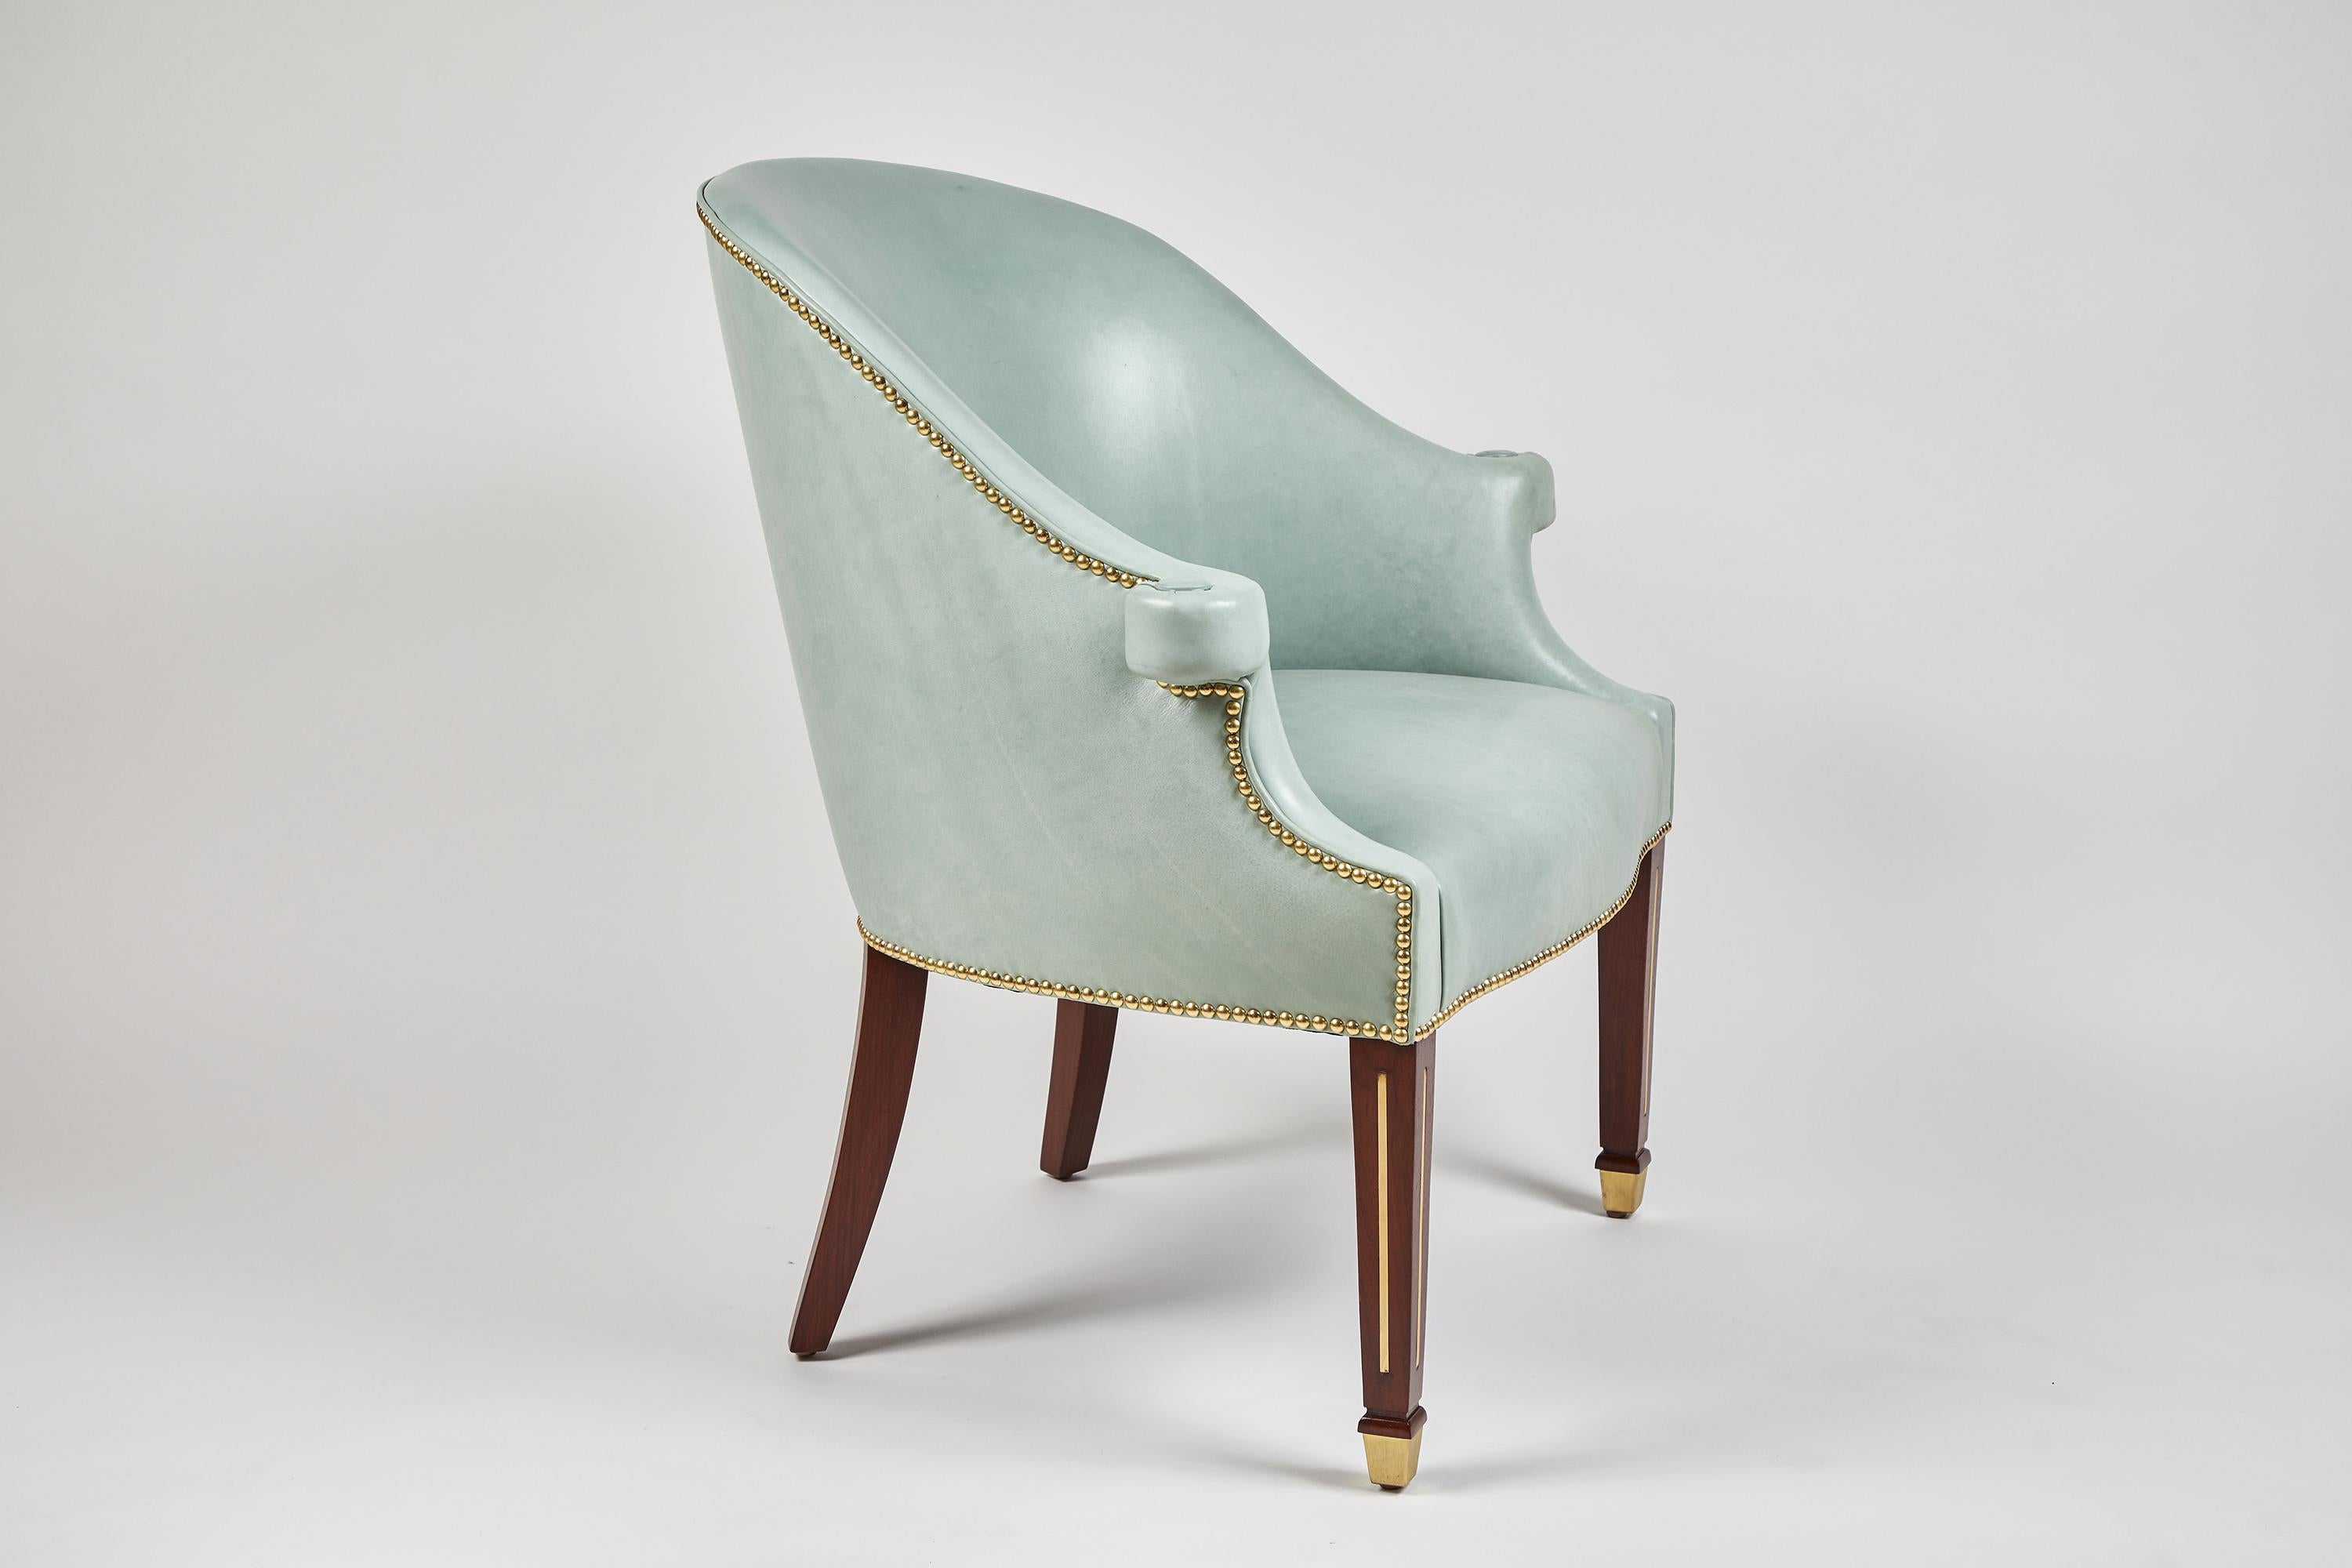 The Hamilton chair, an over-scaled, rather traditional chair all dressed-up and ready to go with legs inlaid with brass, and finished with a sabot. This item is fully customizable.
As chairs are made to order, when produced to specifications they